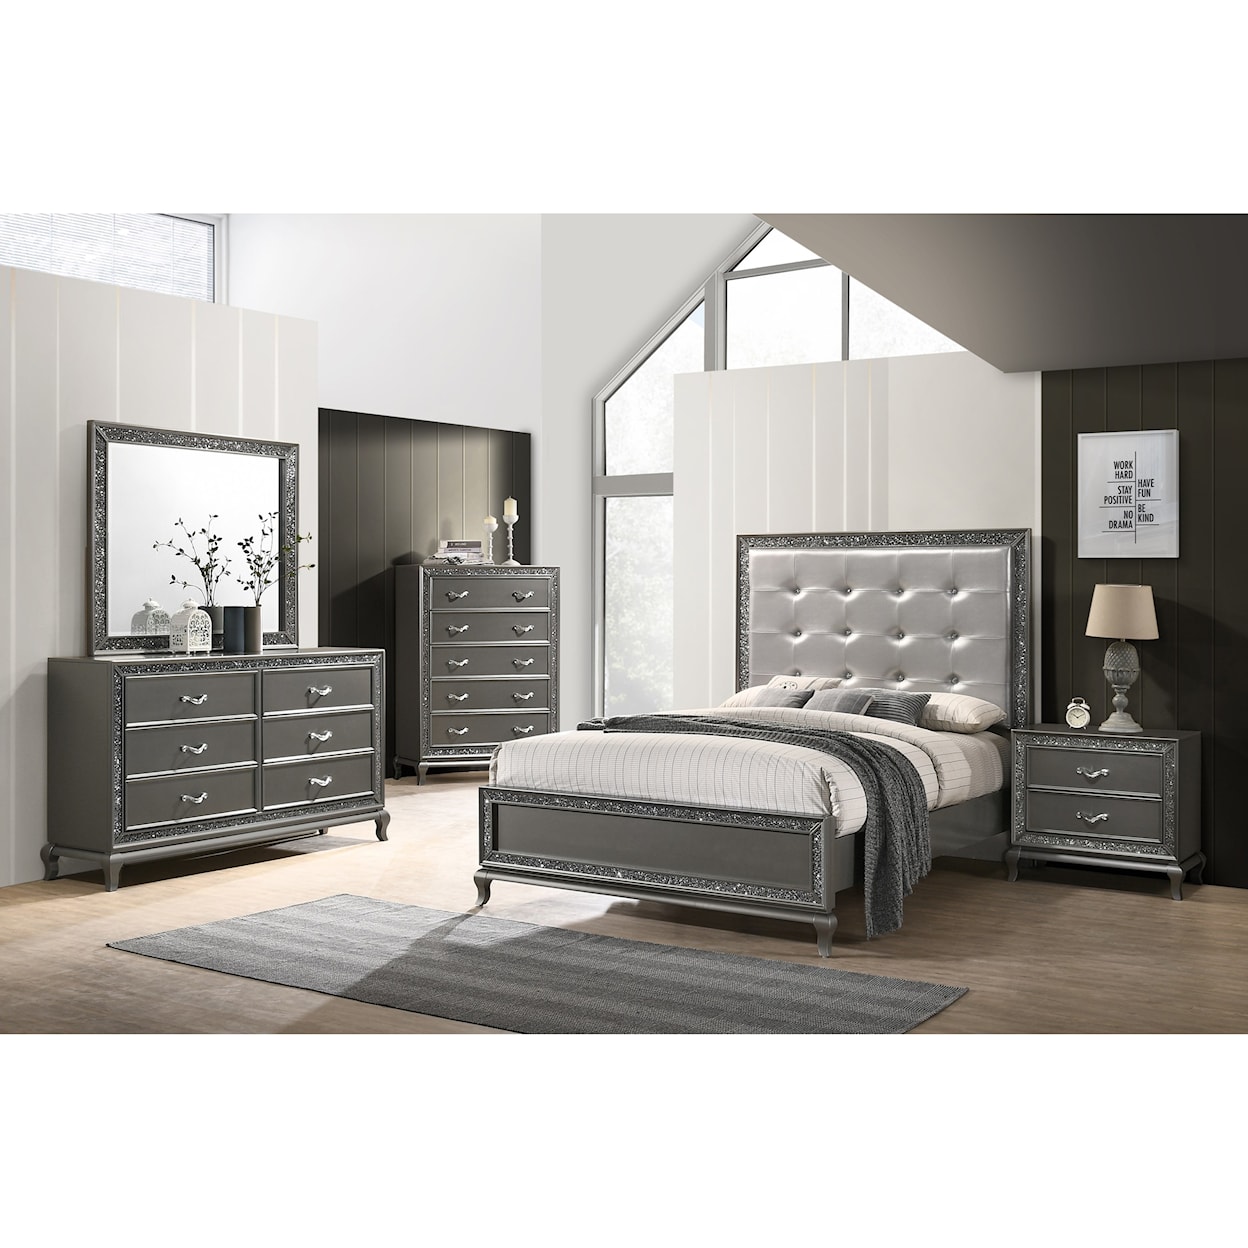 New Classic Park Imperial King Bedroom Group